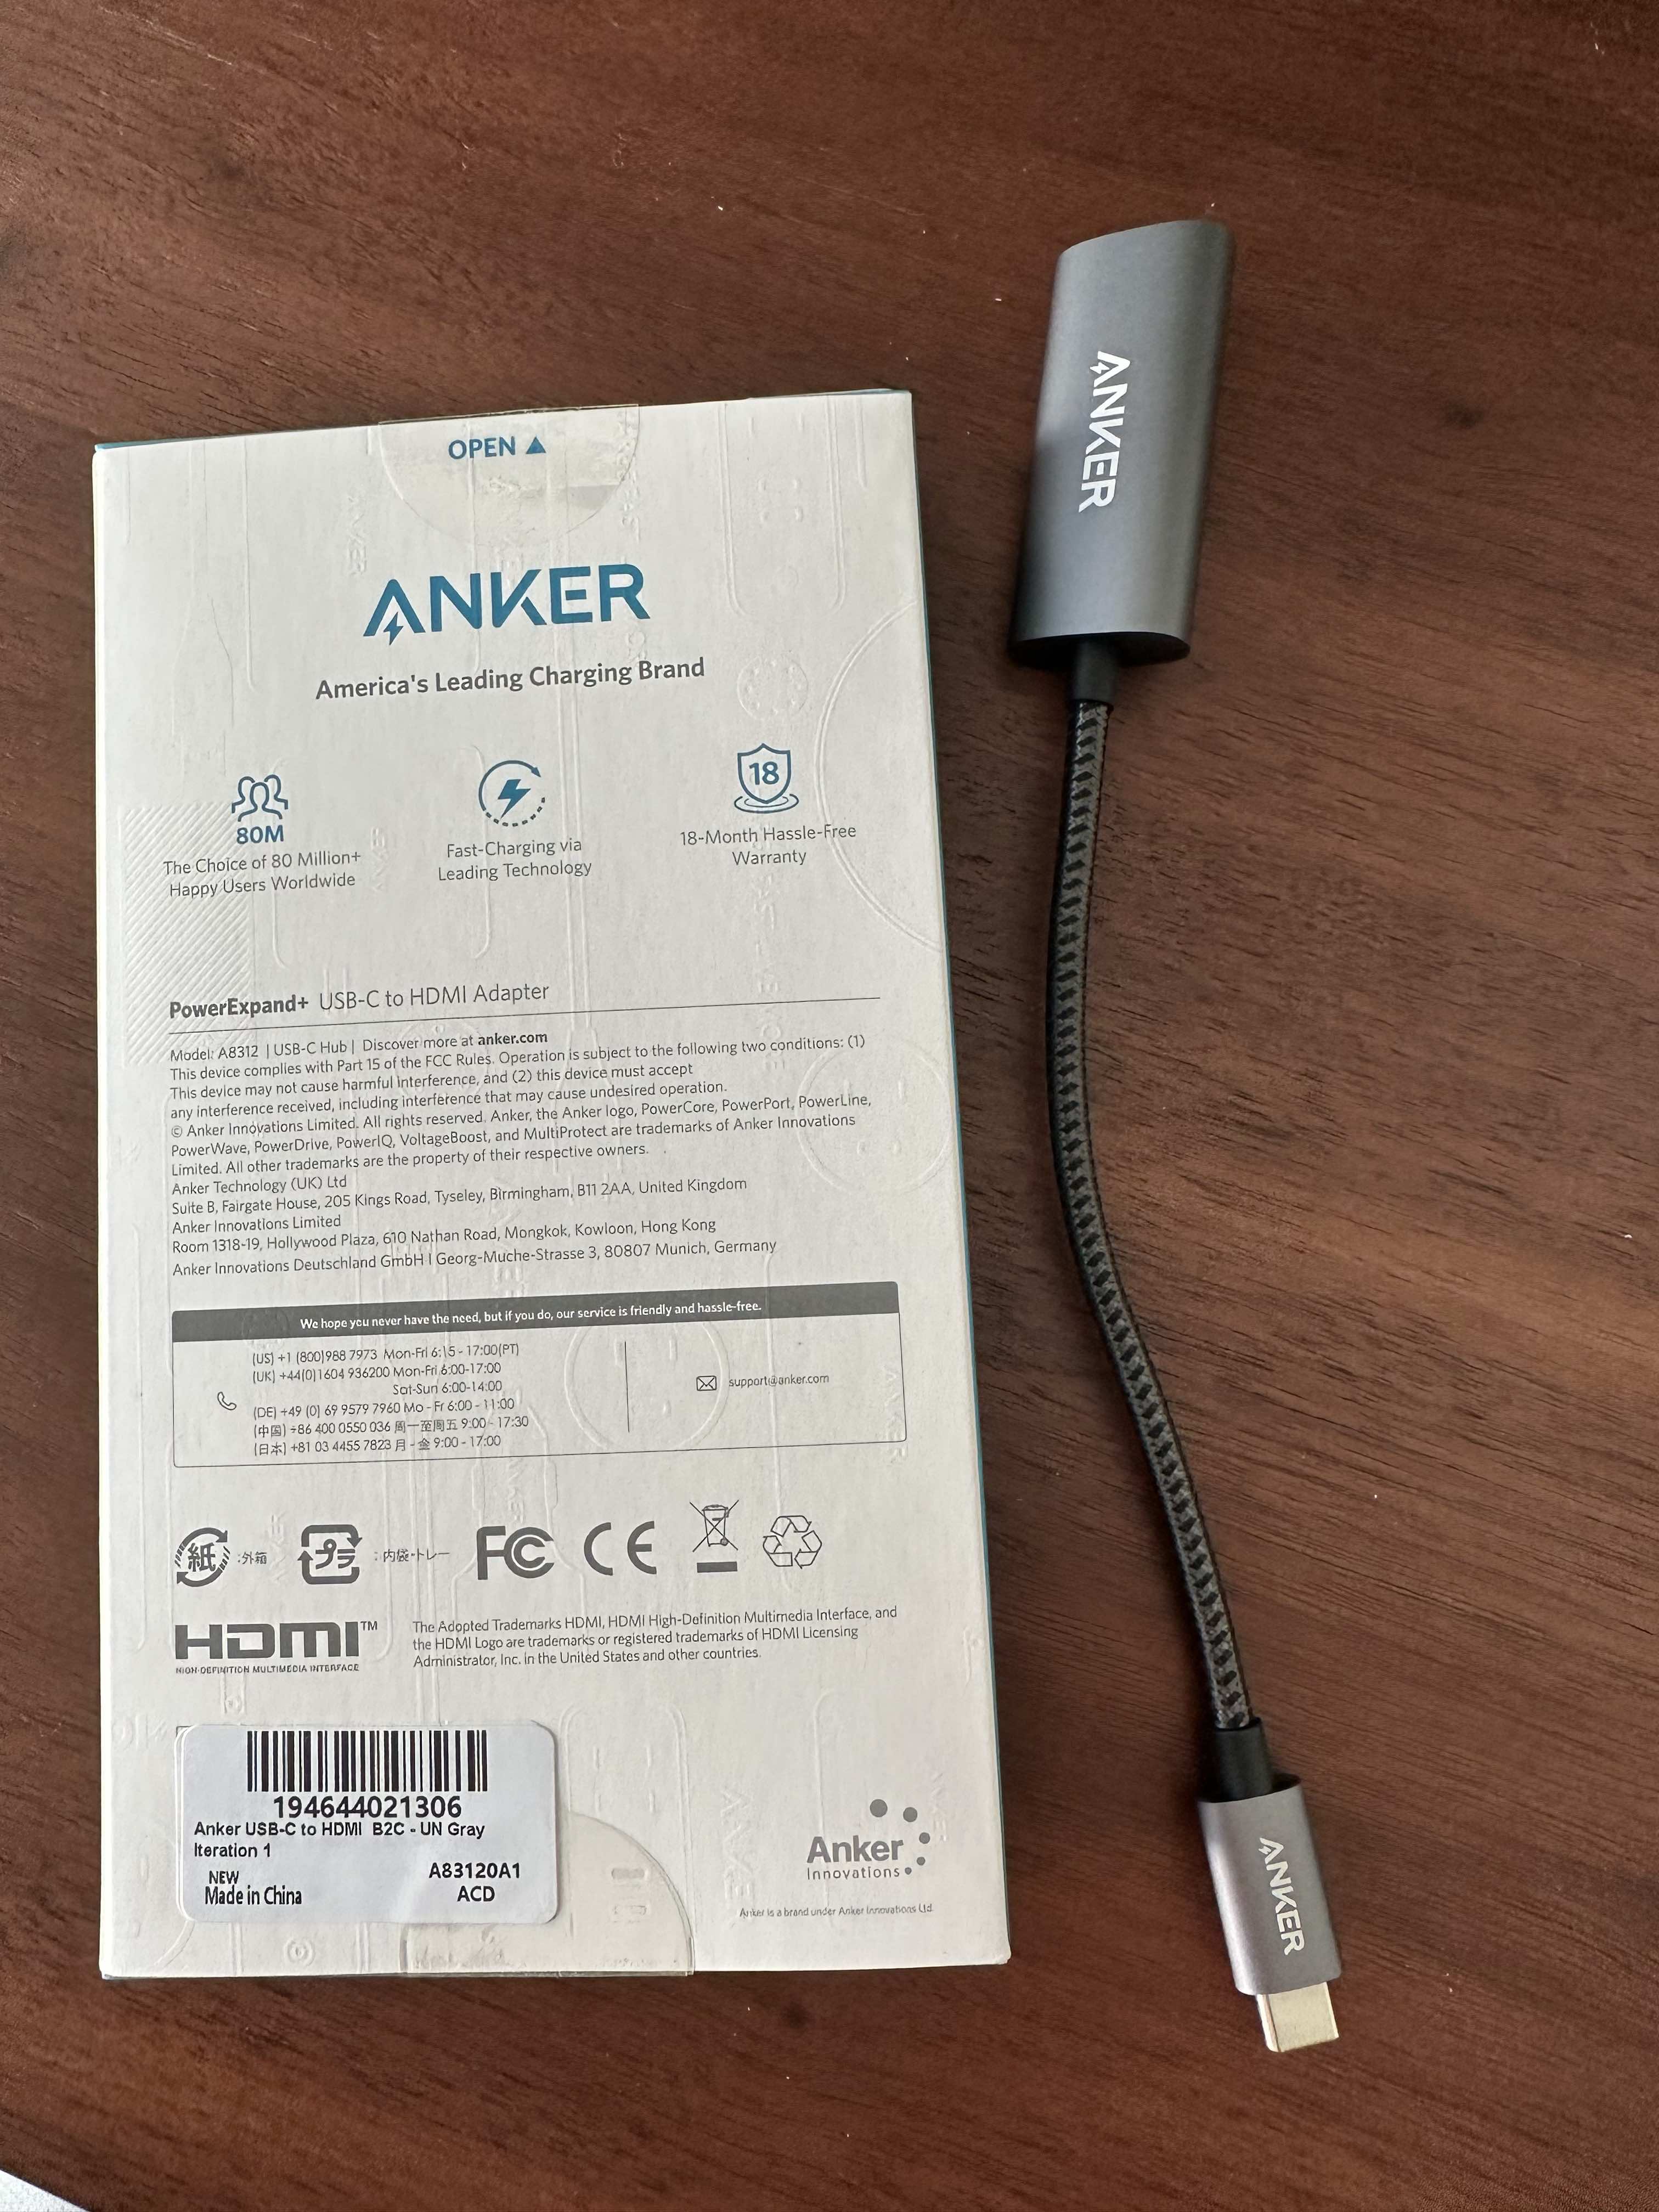 Anker USB C to HDMI Adapter (4K@60Hz), 2 PowerExpand+ Aluminum Portable USB  C Adapter, for MacBook Pro, MacBook Air, iPad Pro, Pixelbook, XPS, Galaxy,  and More (Compatible with Thunderbolt 3 ports) 